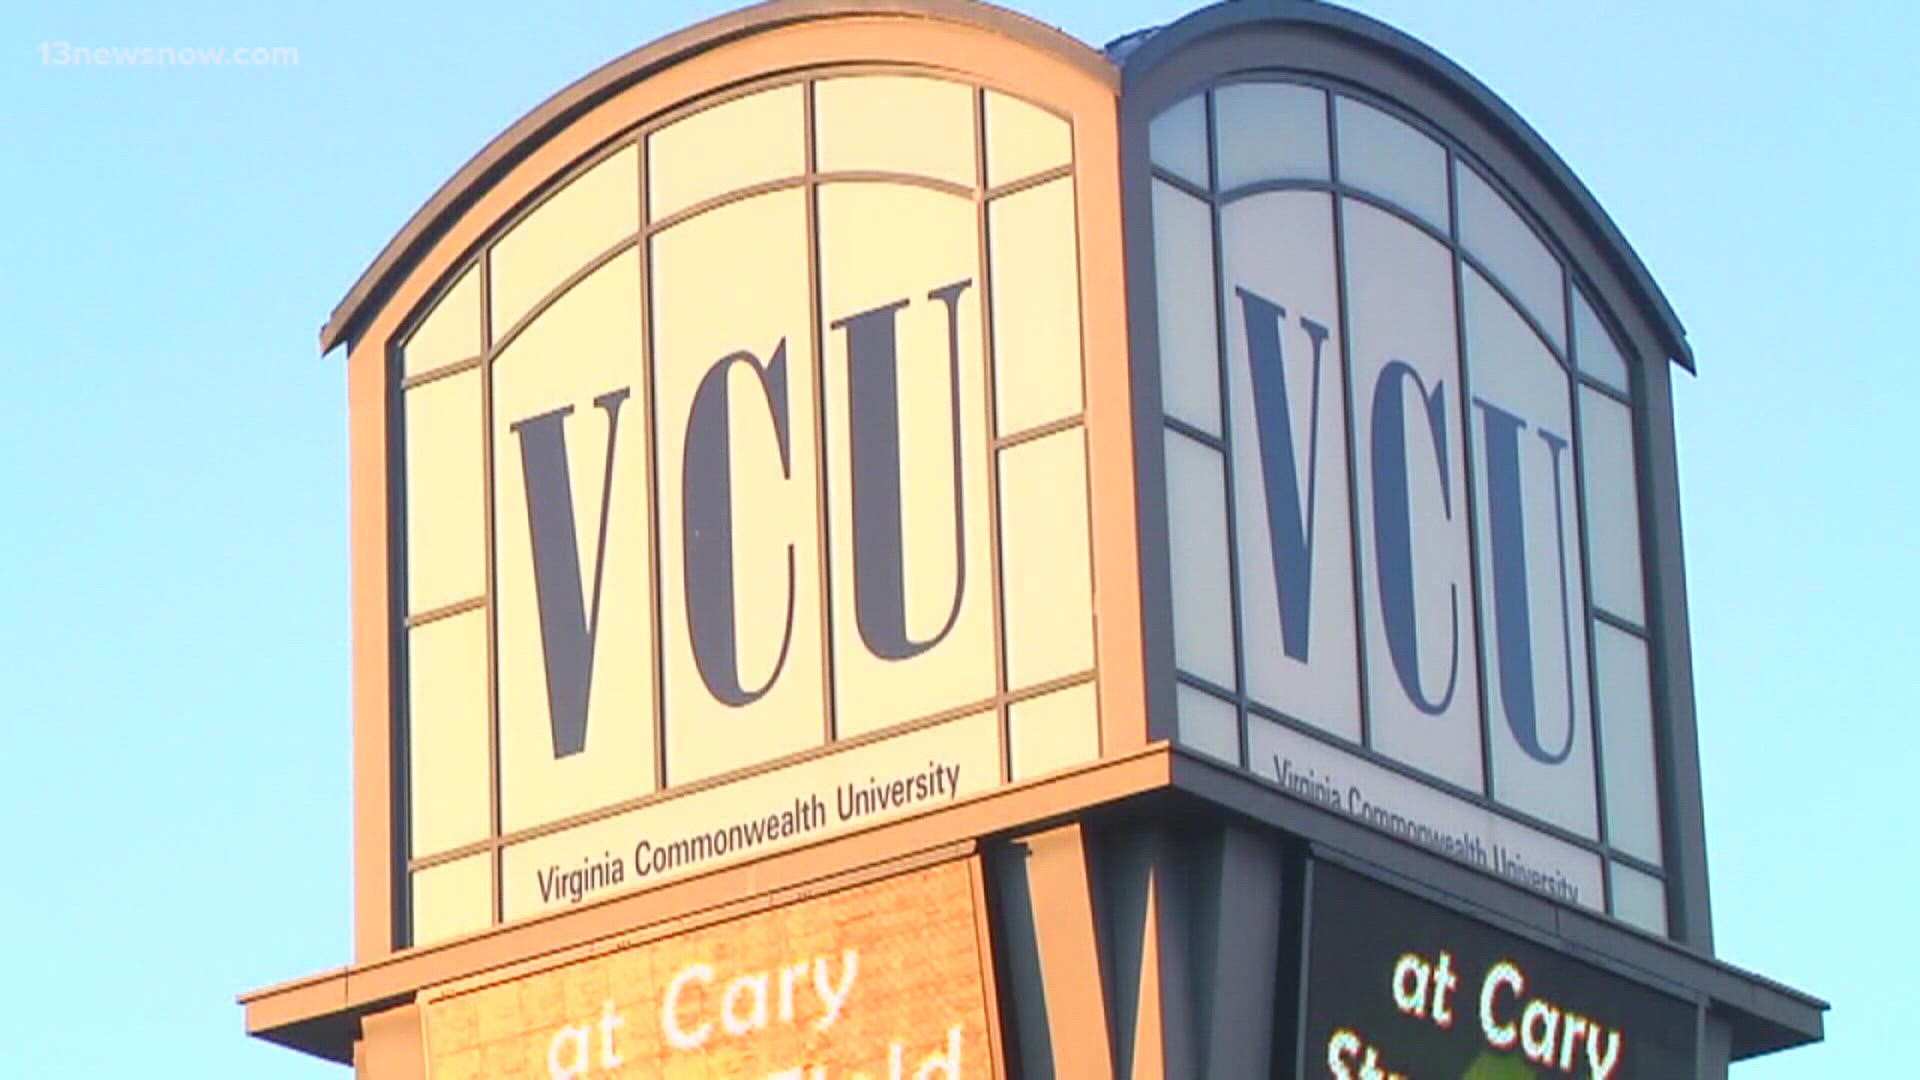 Greek life at Virginia Commonwealth University is in hot water. One fraternity and sorority are facing years suspension.